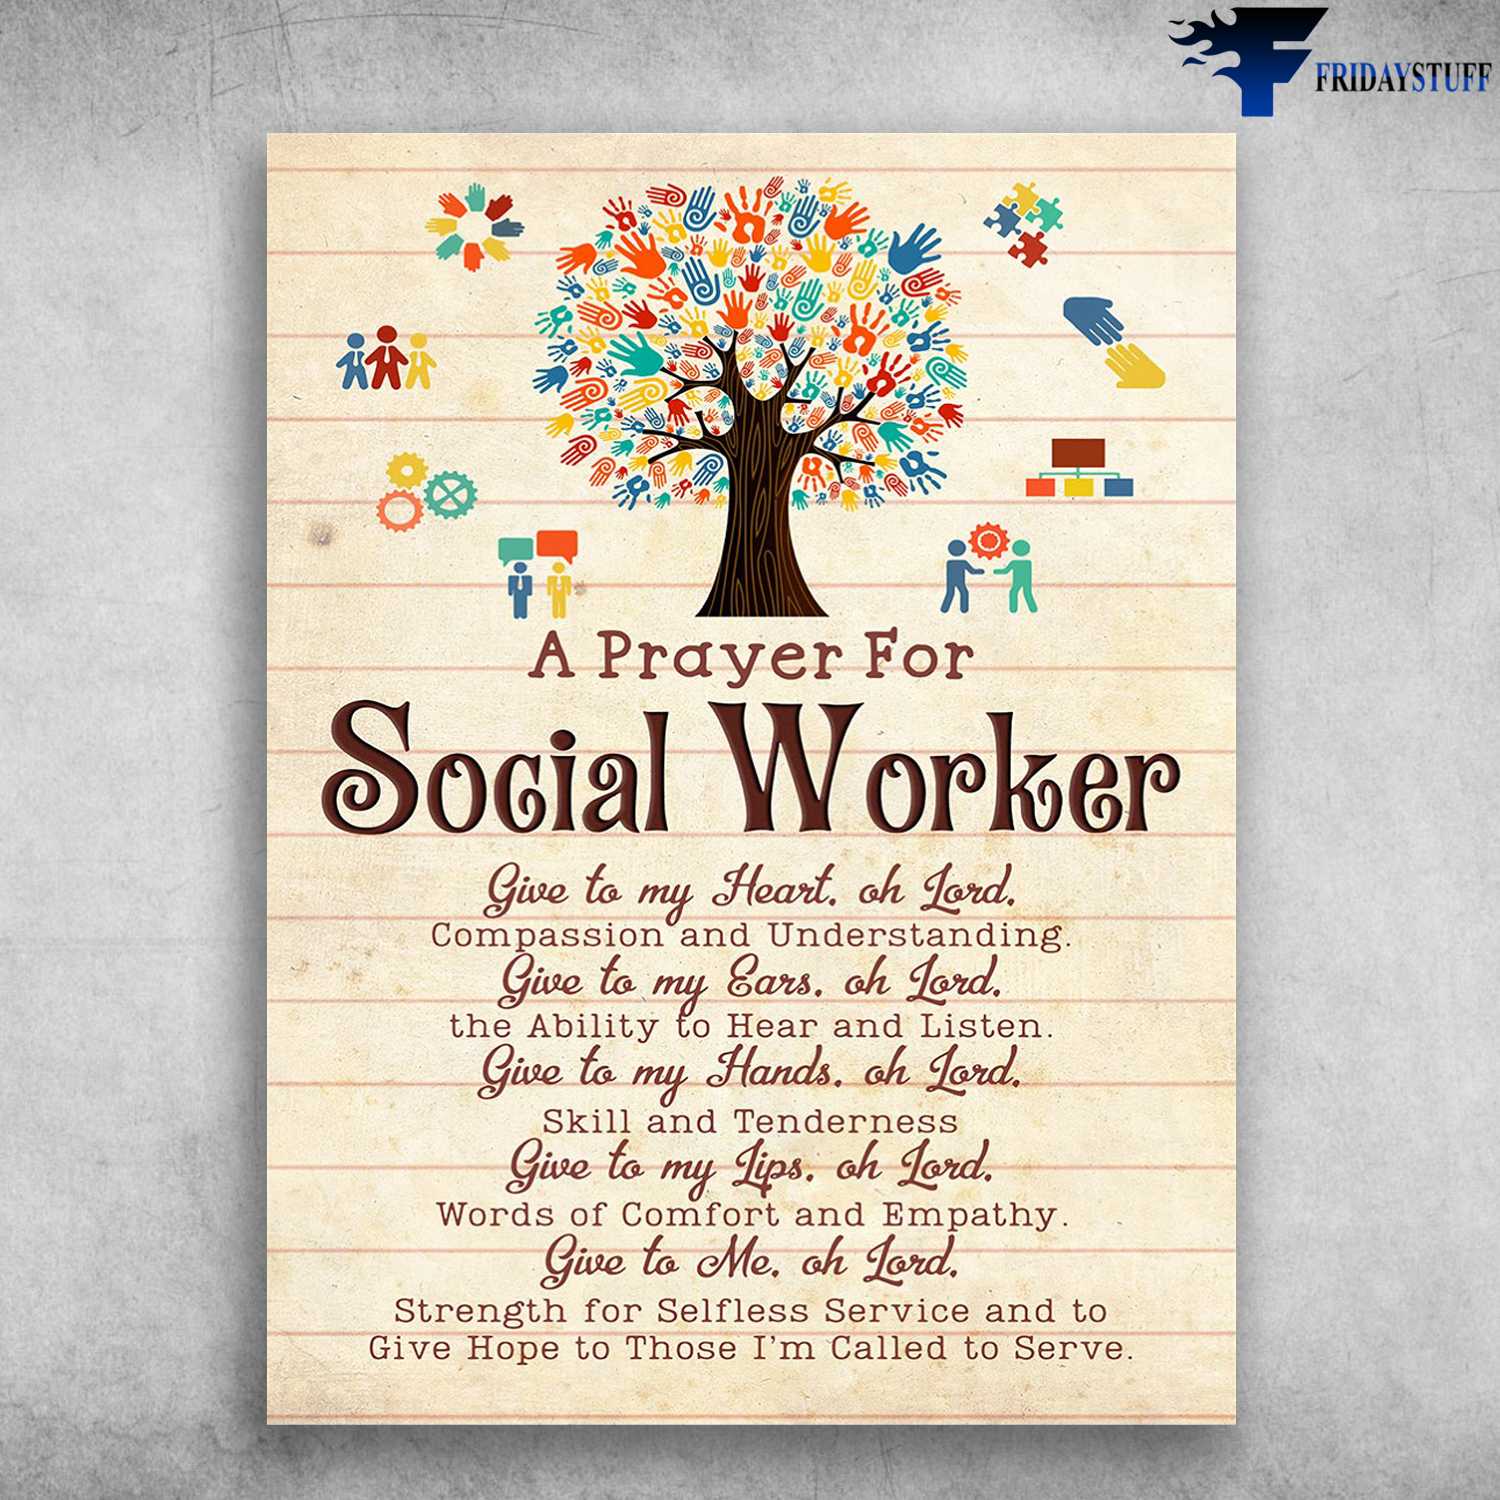 Social Worker Poster - A Prayer For Social Worker, Give To My Heart, Oh Lord, Compassion And Understanding, Give To My Ears, Oh Lord, The Ability To Hear And Listen